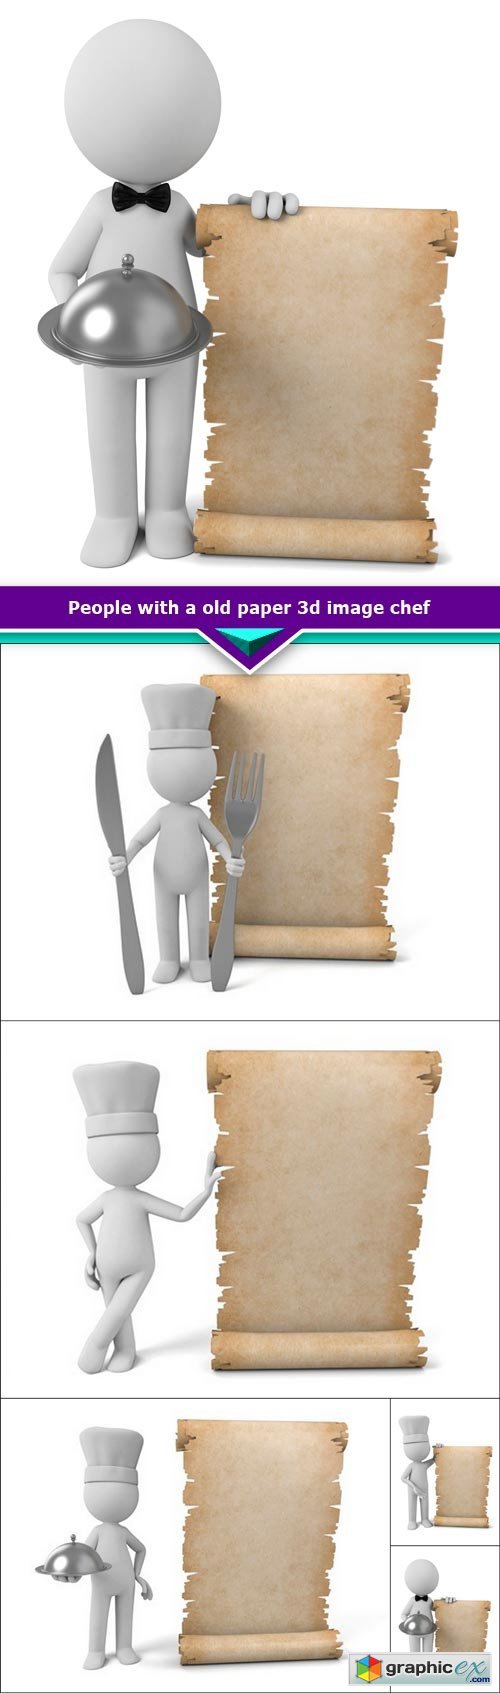 People with a old paper 3d image chef 5x JPEG